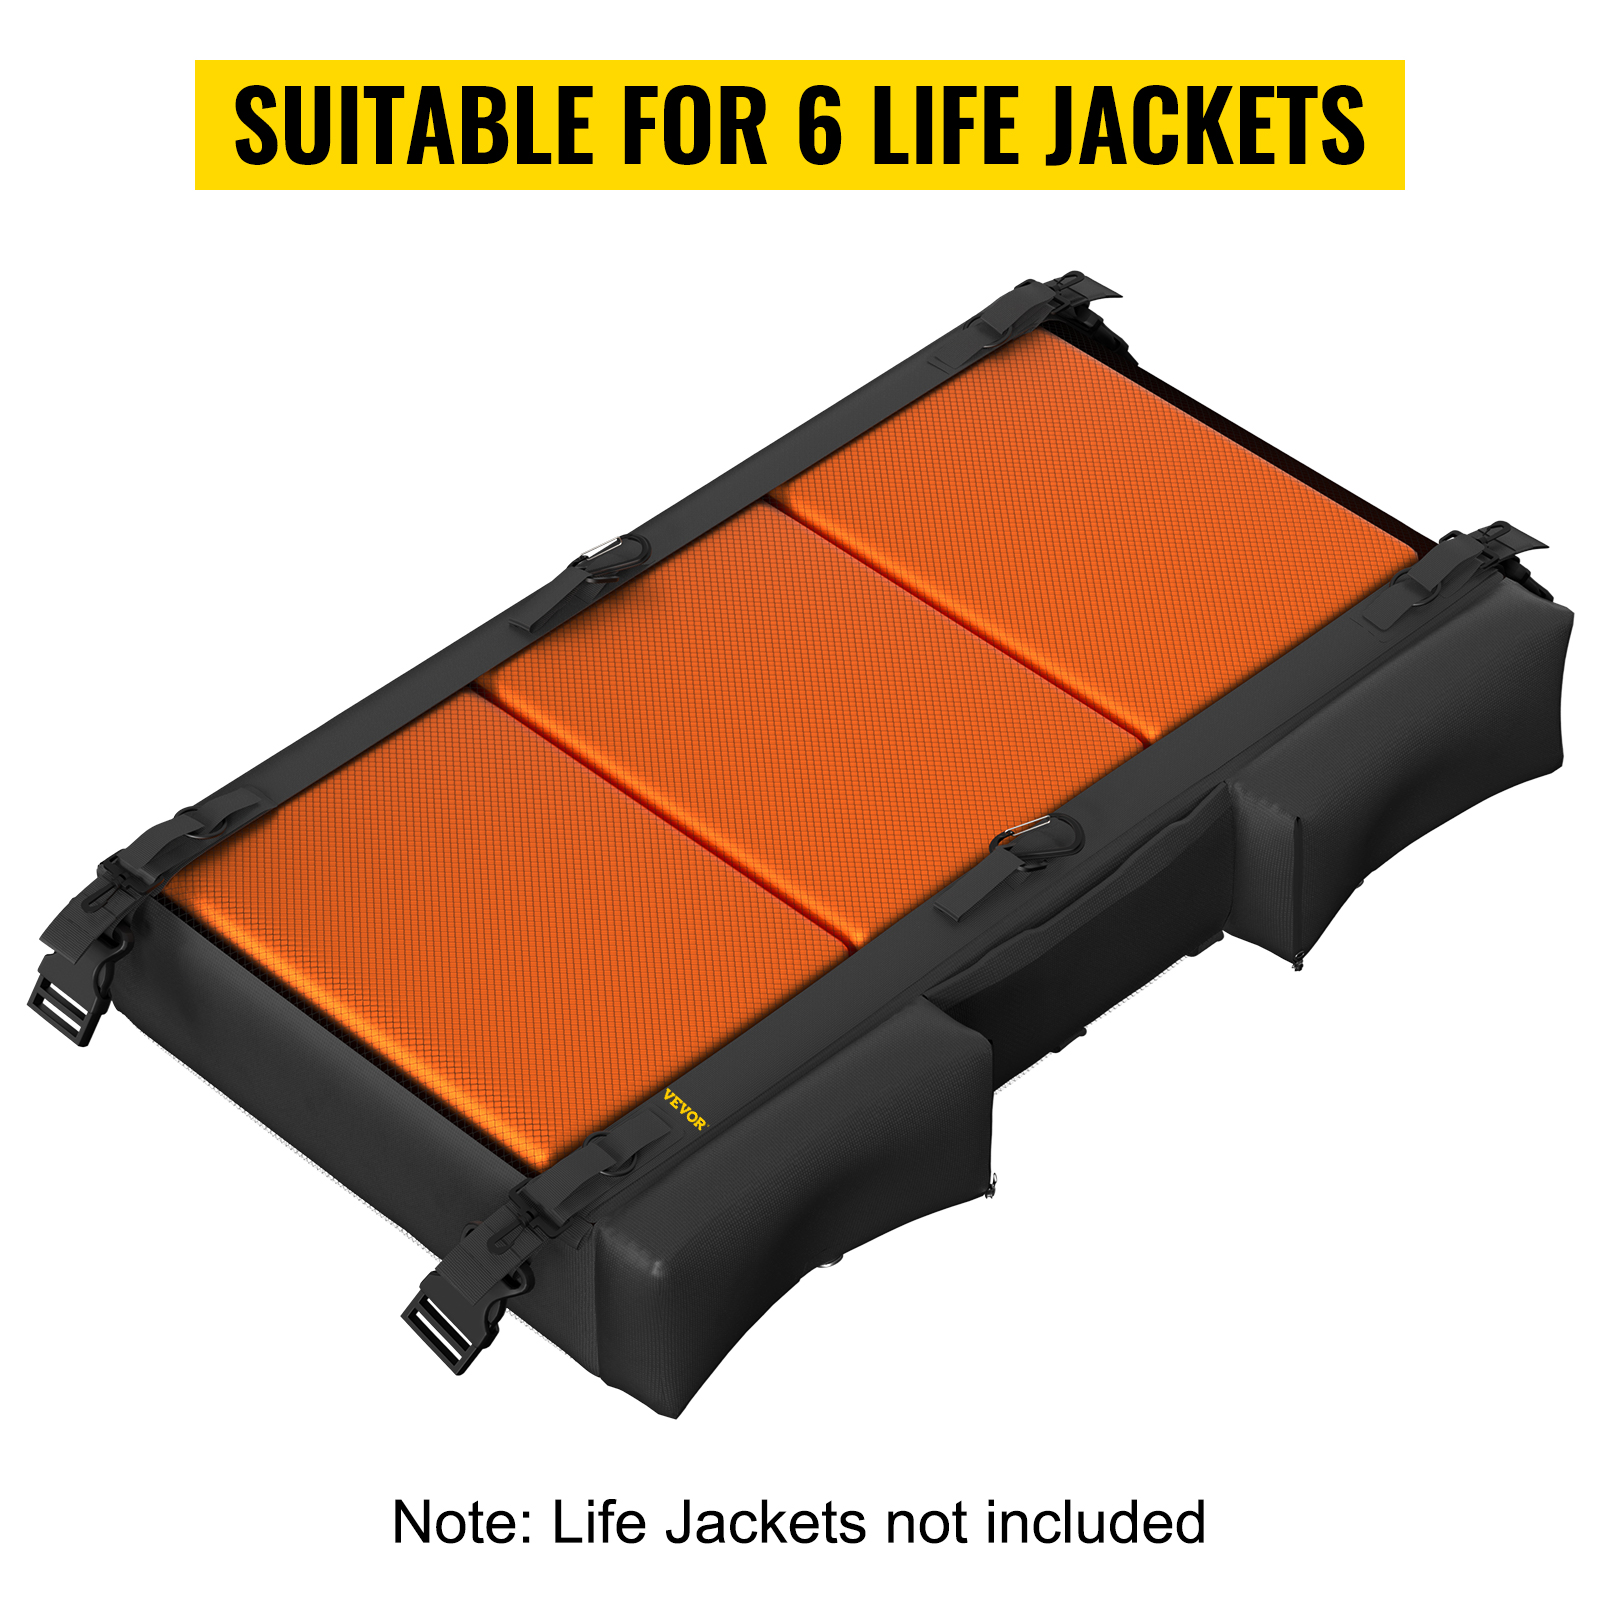 Holds up to 6 Type II Life Jackets Black Fasrom T-top Storage Bag for Boat Life Jackets NOT Includes Life Jackets 